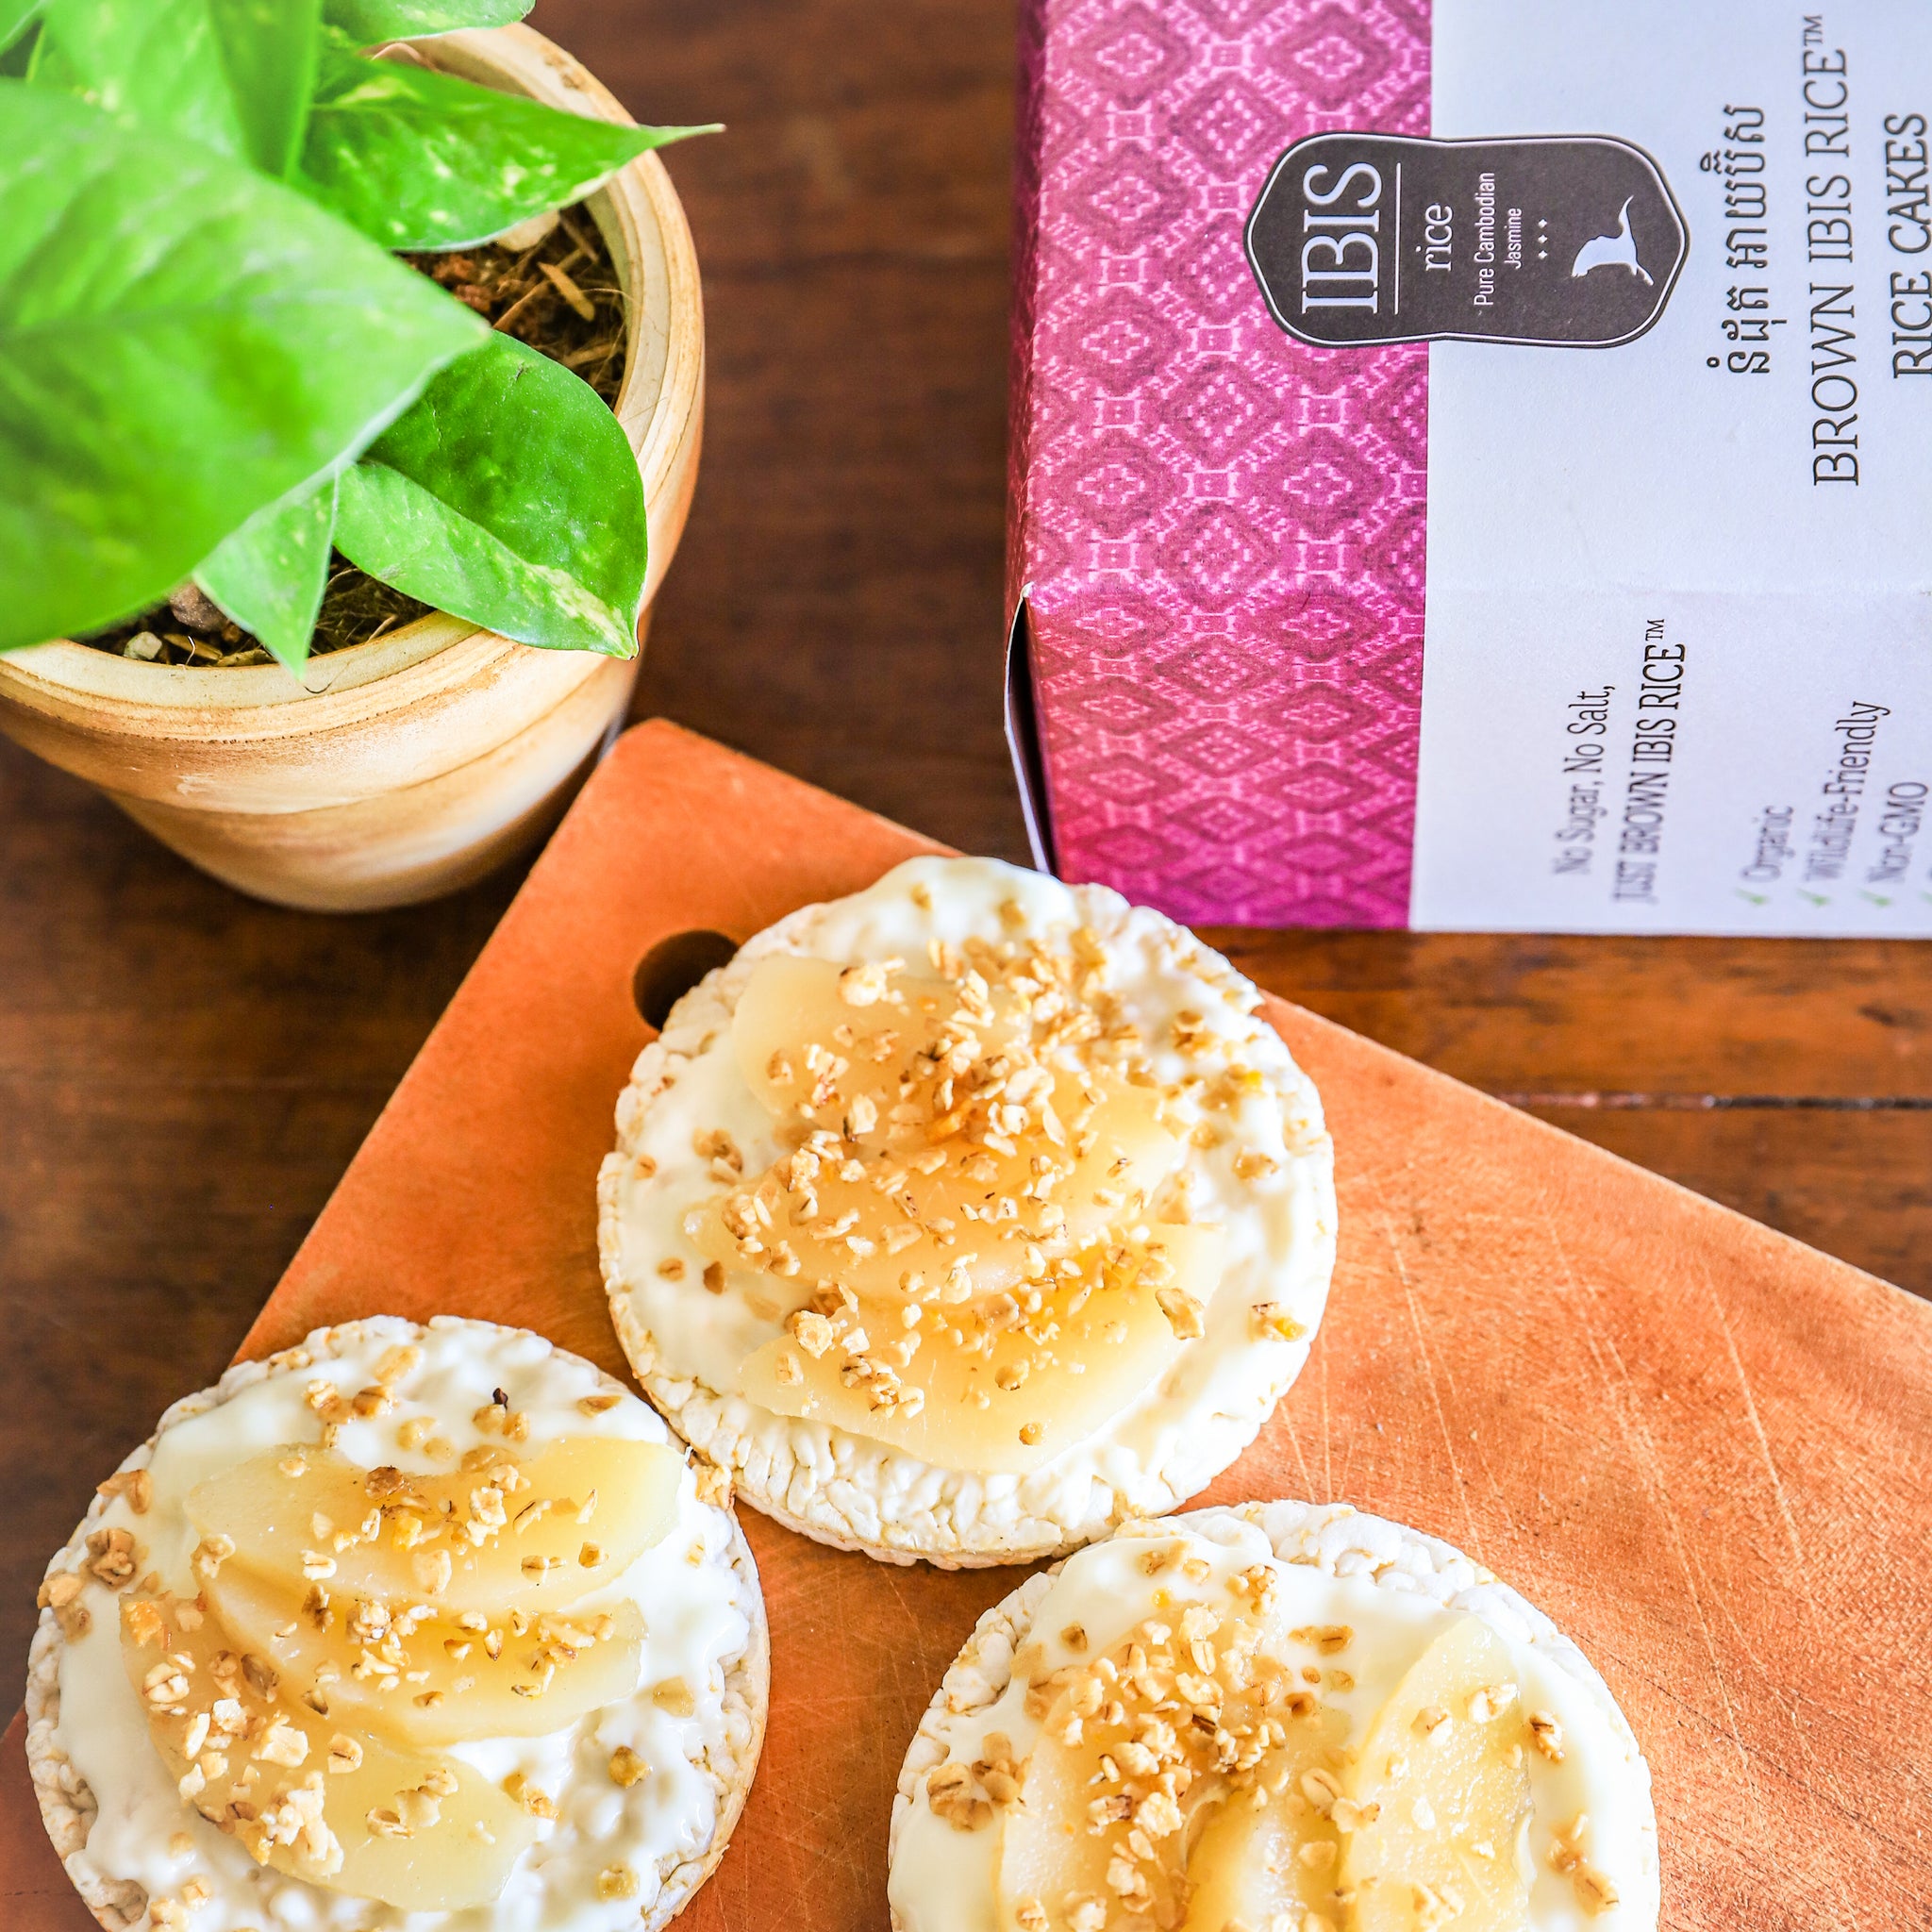 No added sugar or salt, these IBIS Brown Rice Cakes are 100% organic and offer a deliciously nutty, fragrant flavor. An ideal afternoon treat, try topping with peanut butter or jam for added flavor.